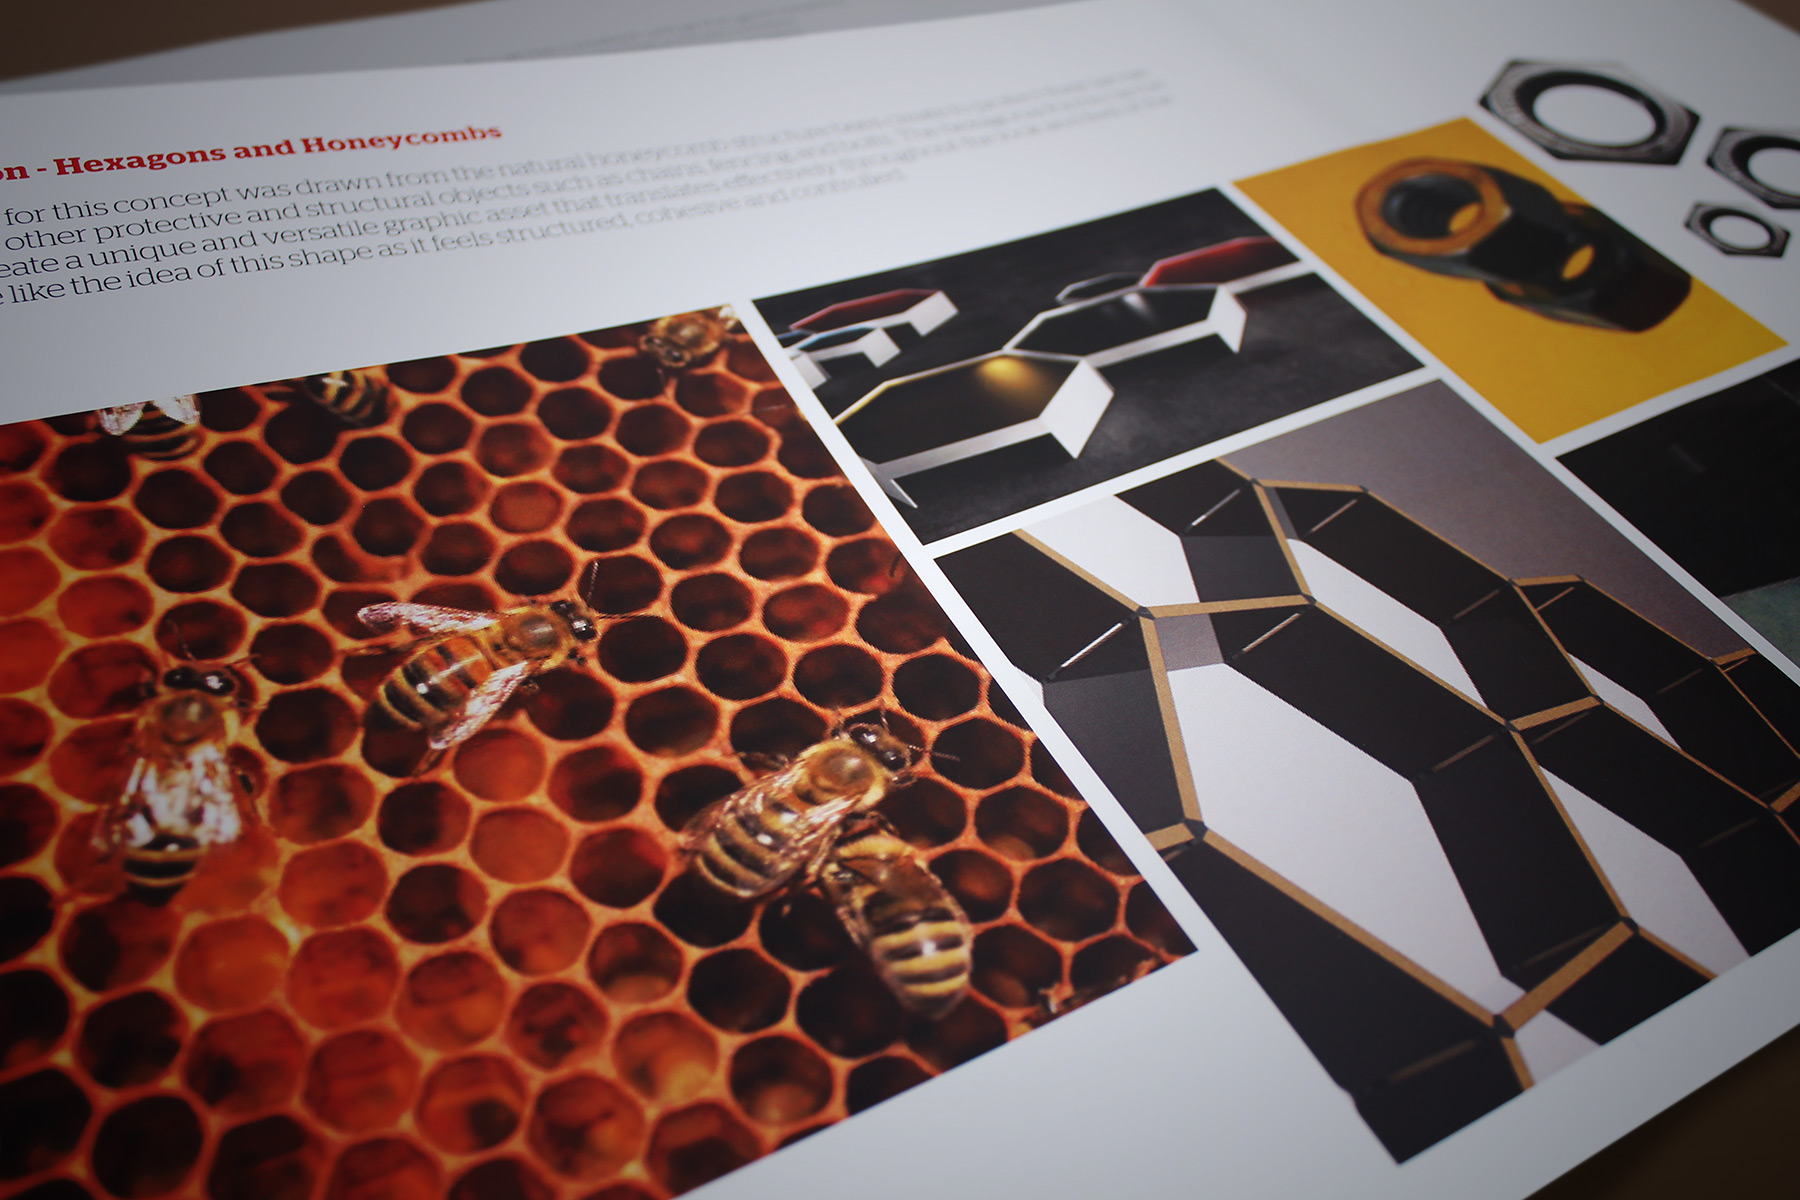 Our inspiration was drawn from the natural honeycomb structure bees create to protect their larvae.